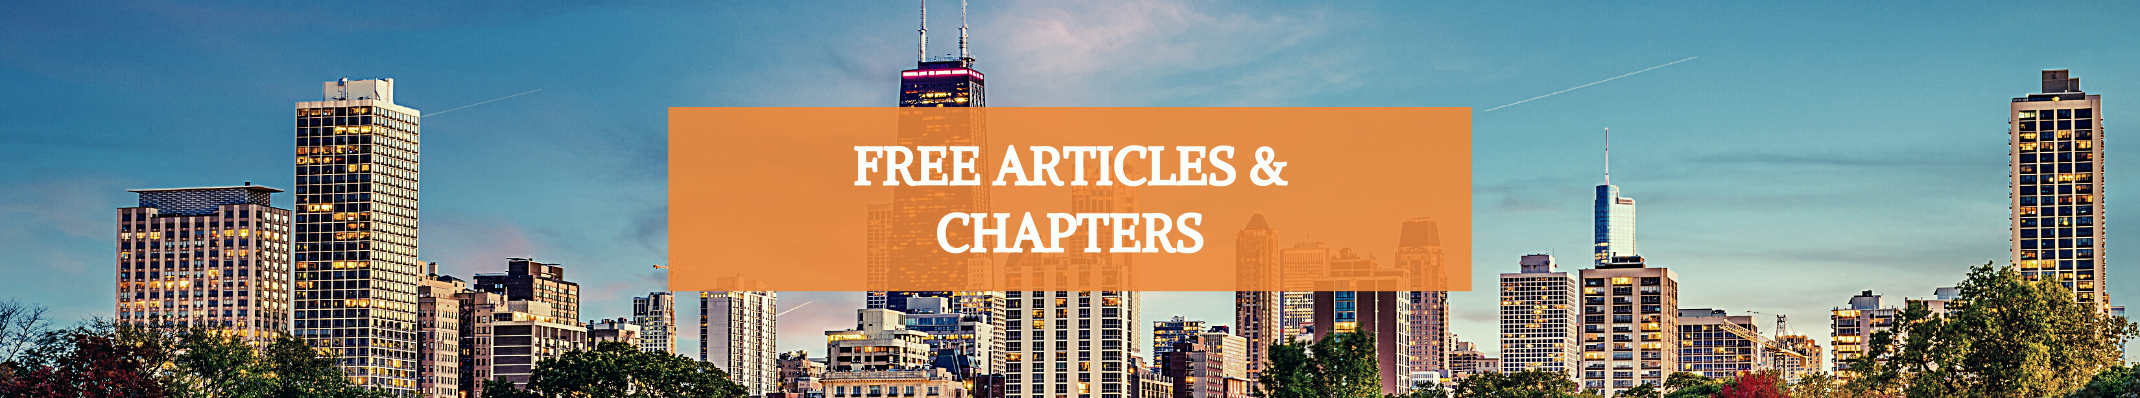 MPSA Free articles and chapters image